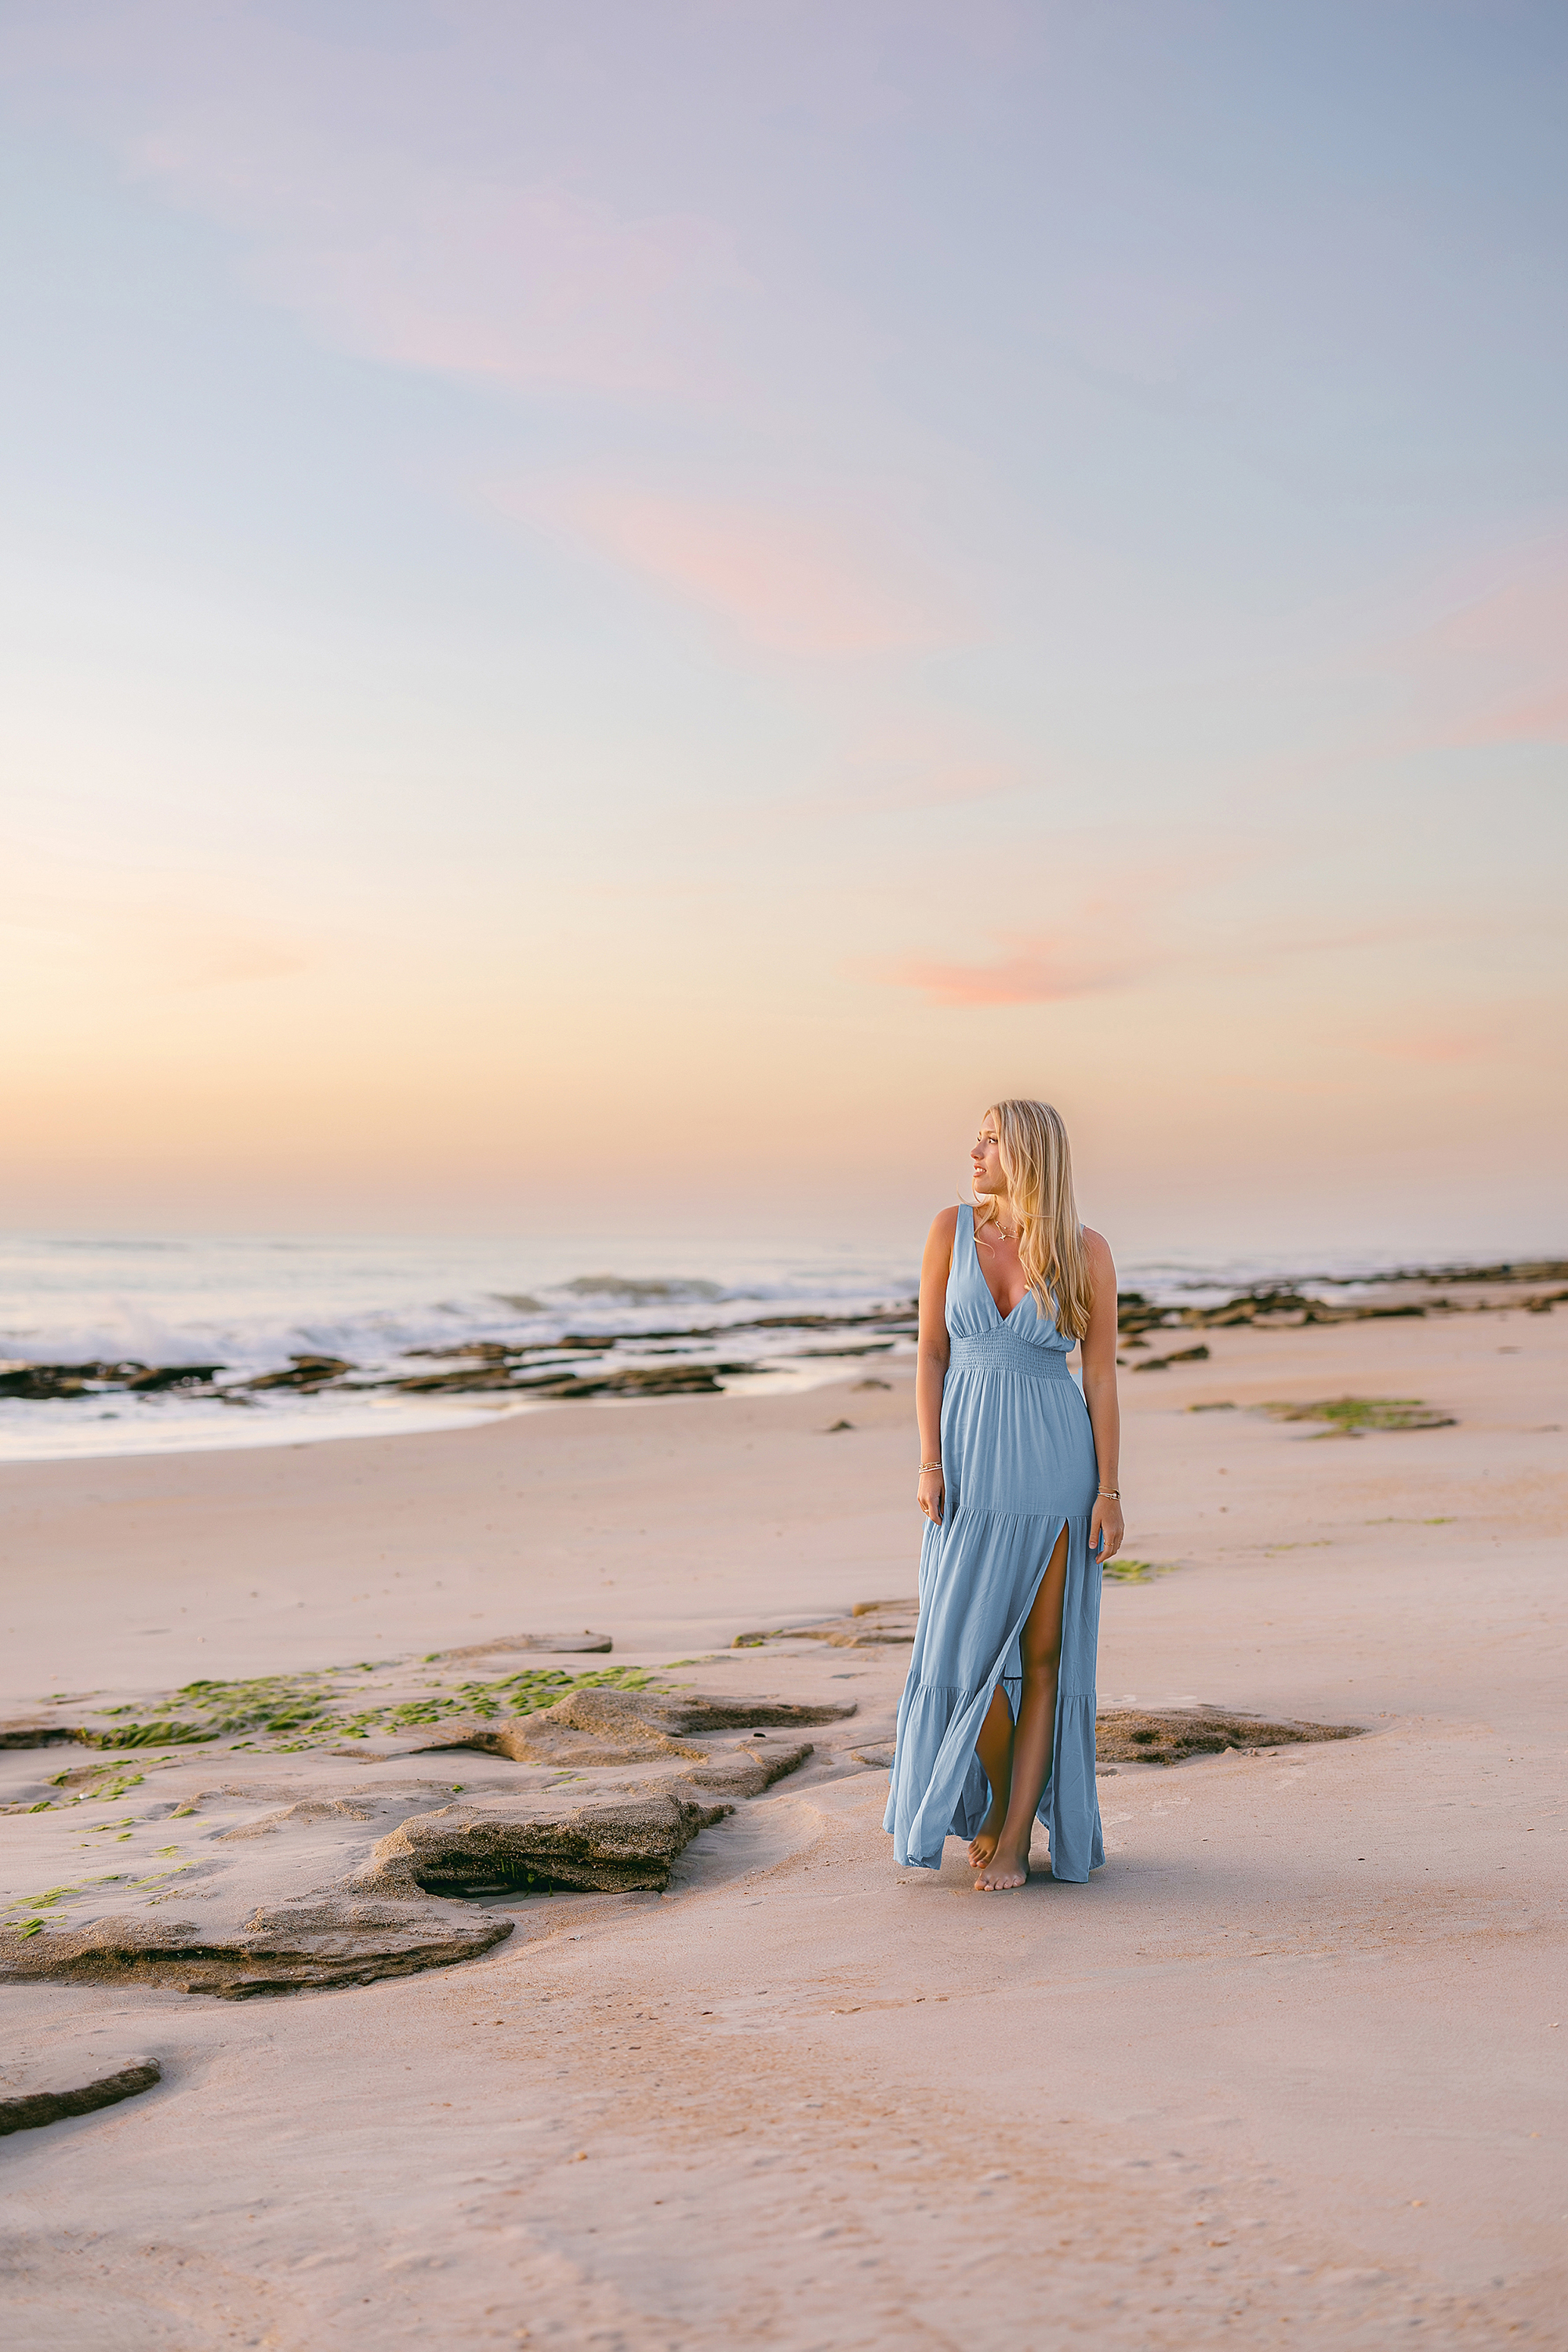 A colorful sunrise portrait of a young grad walking on the beach in a blue dress.